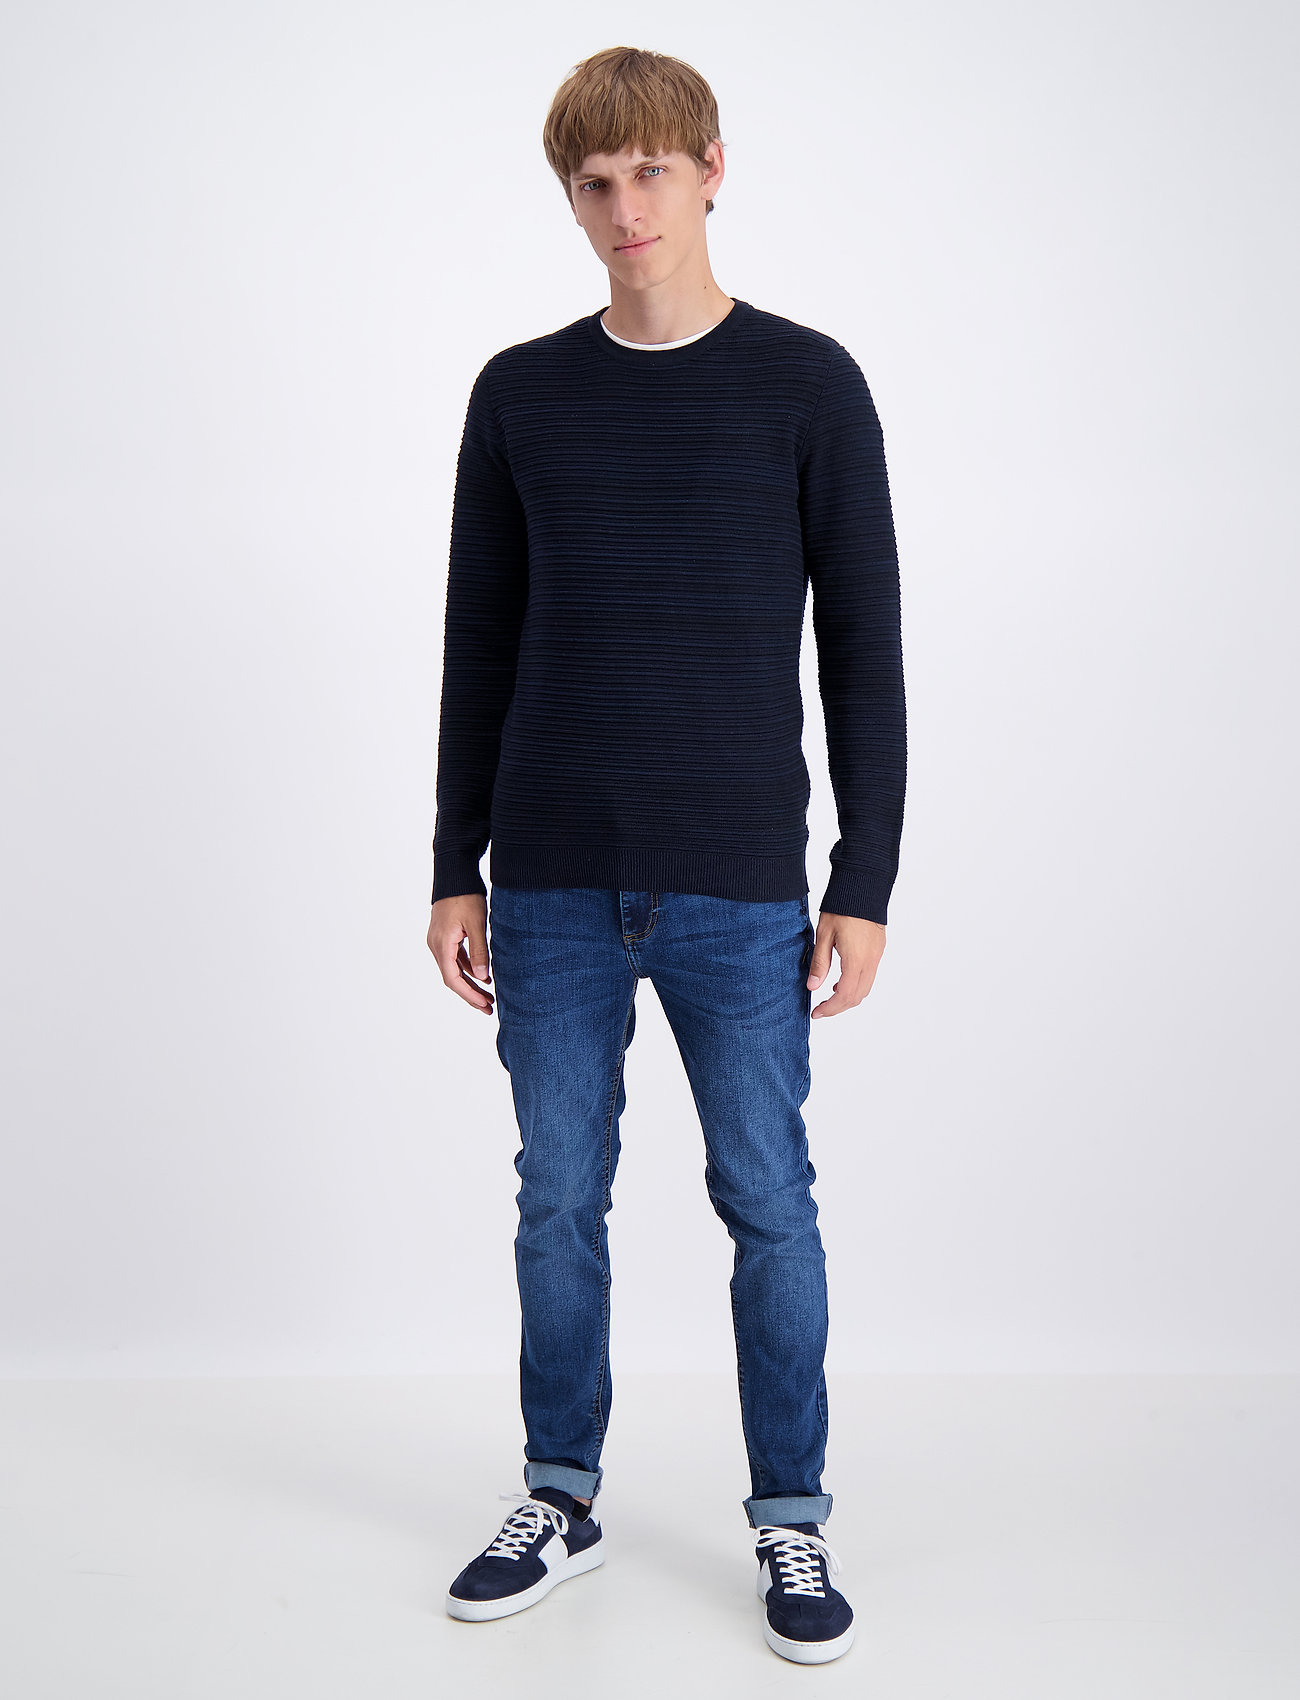 Lindbergh - Structure knit - nordic style - navy mel - 0